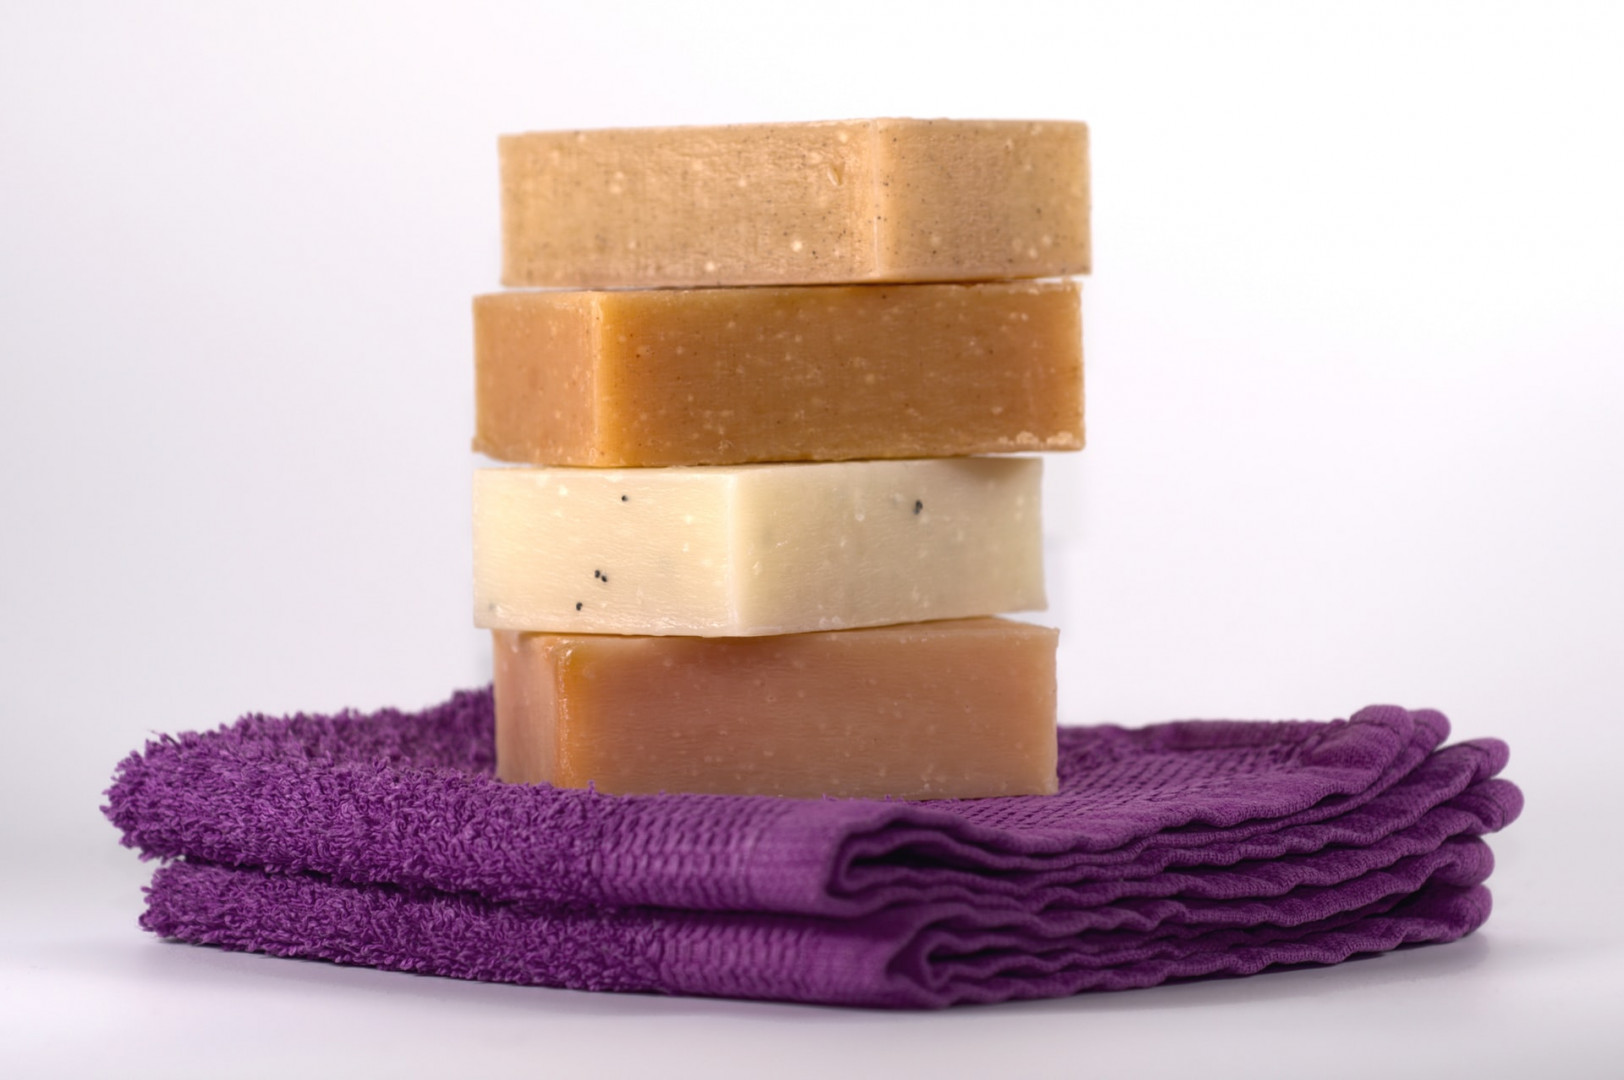 Natural Cosmetics and Olive Oil Soap-Making in Thessaloniki - Grekaddict